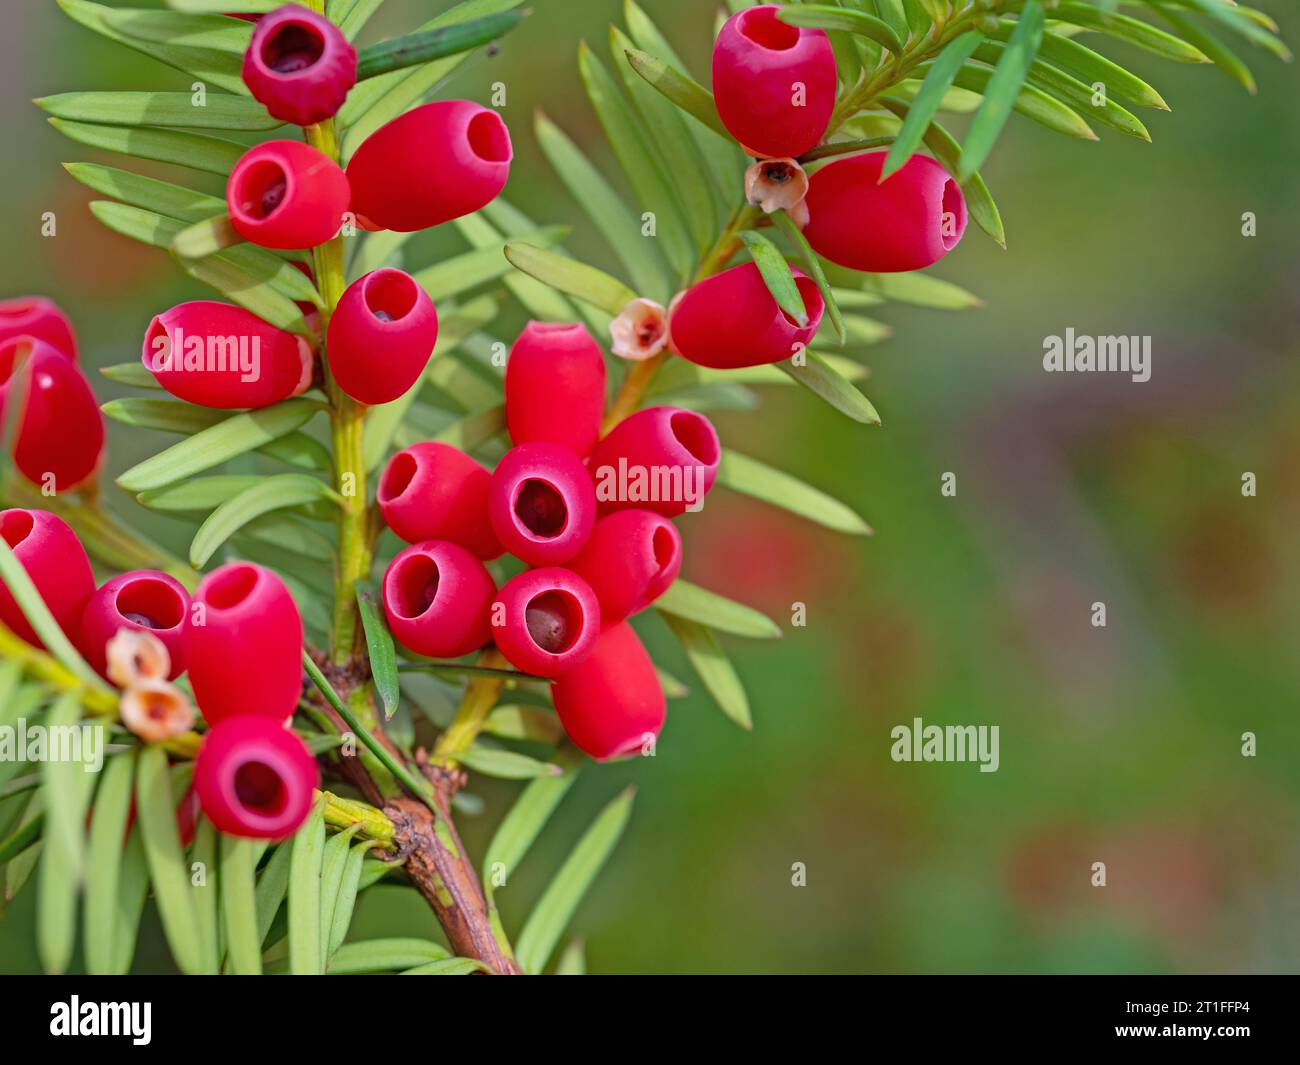 Fruits of the yew tree in a close-up Stock Photo